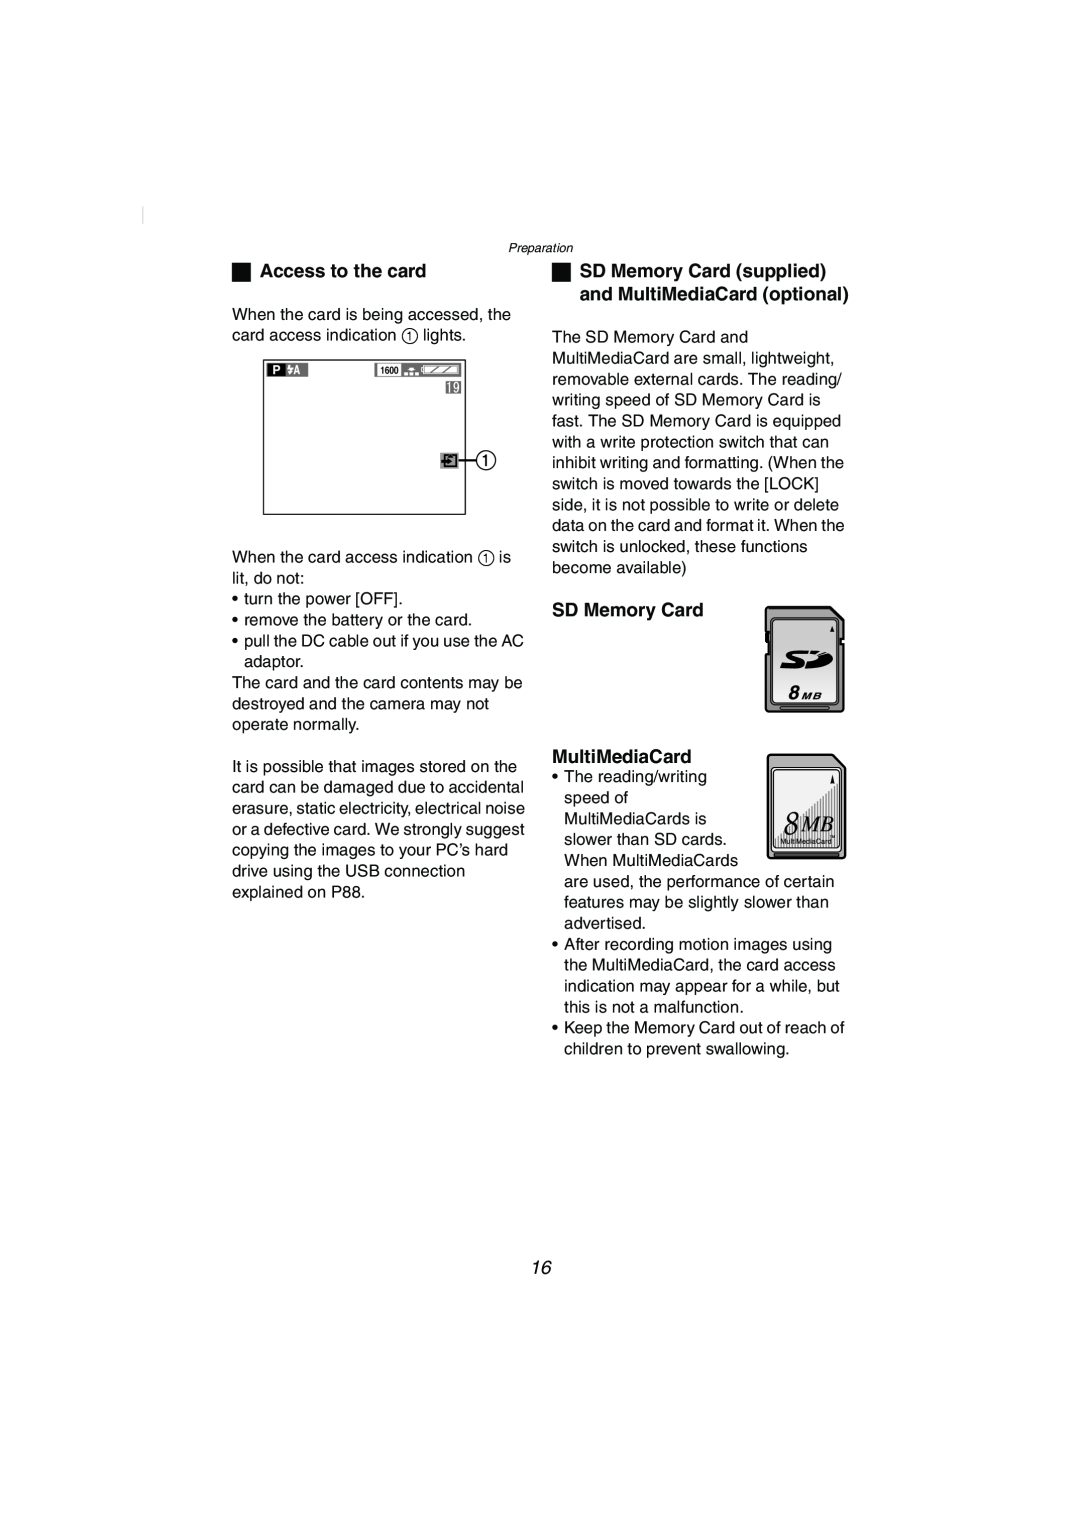 Panasonic DMC-FZ2PP operating instructions ª Access to the card, ª SD Memory Card supplied and MultiMediaCard optional 